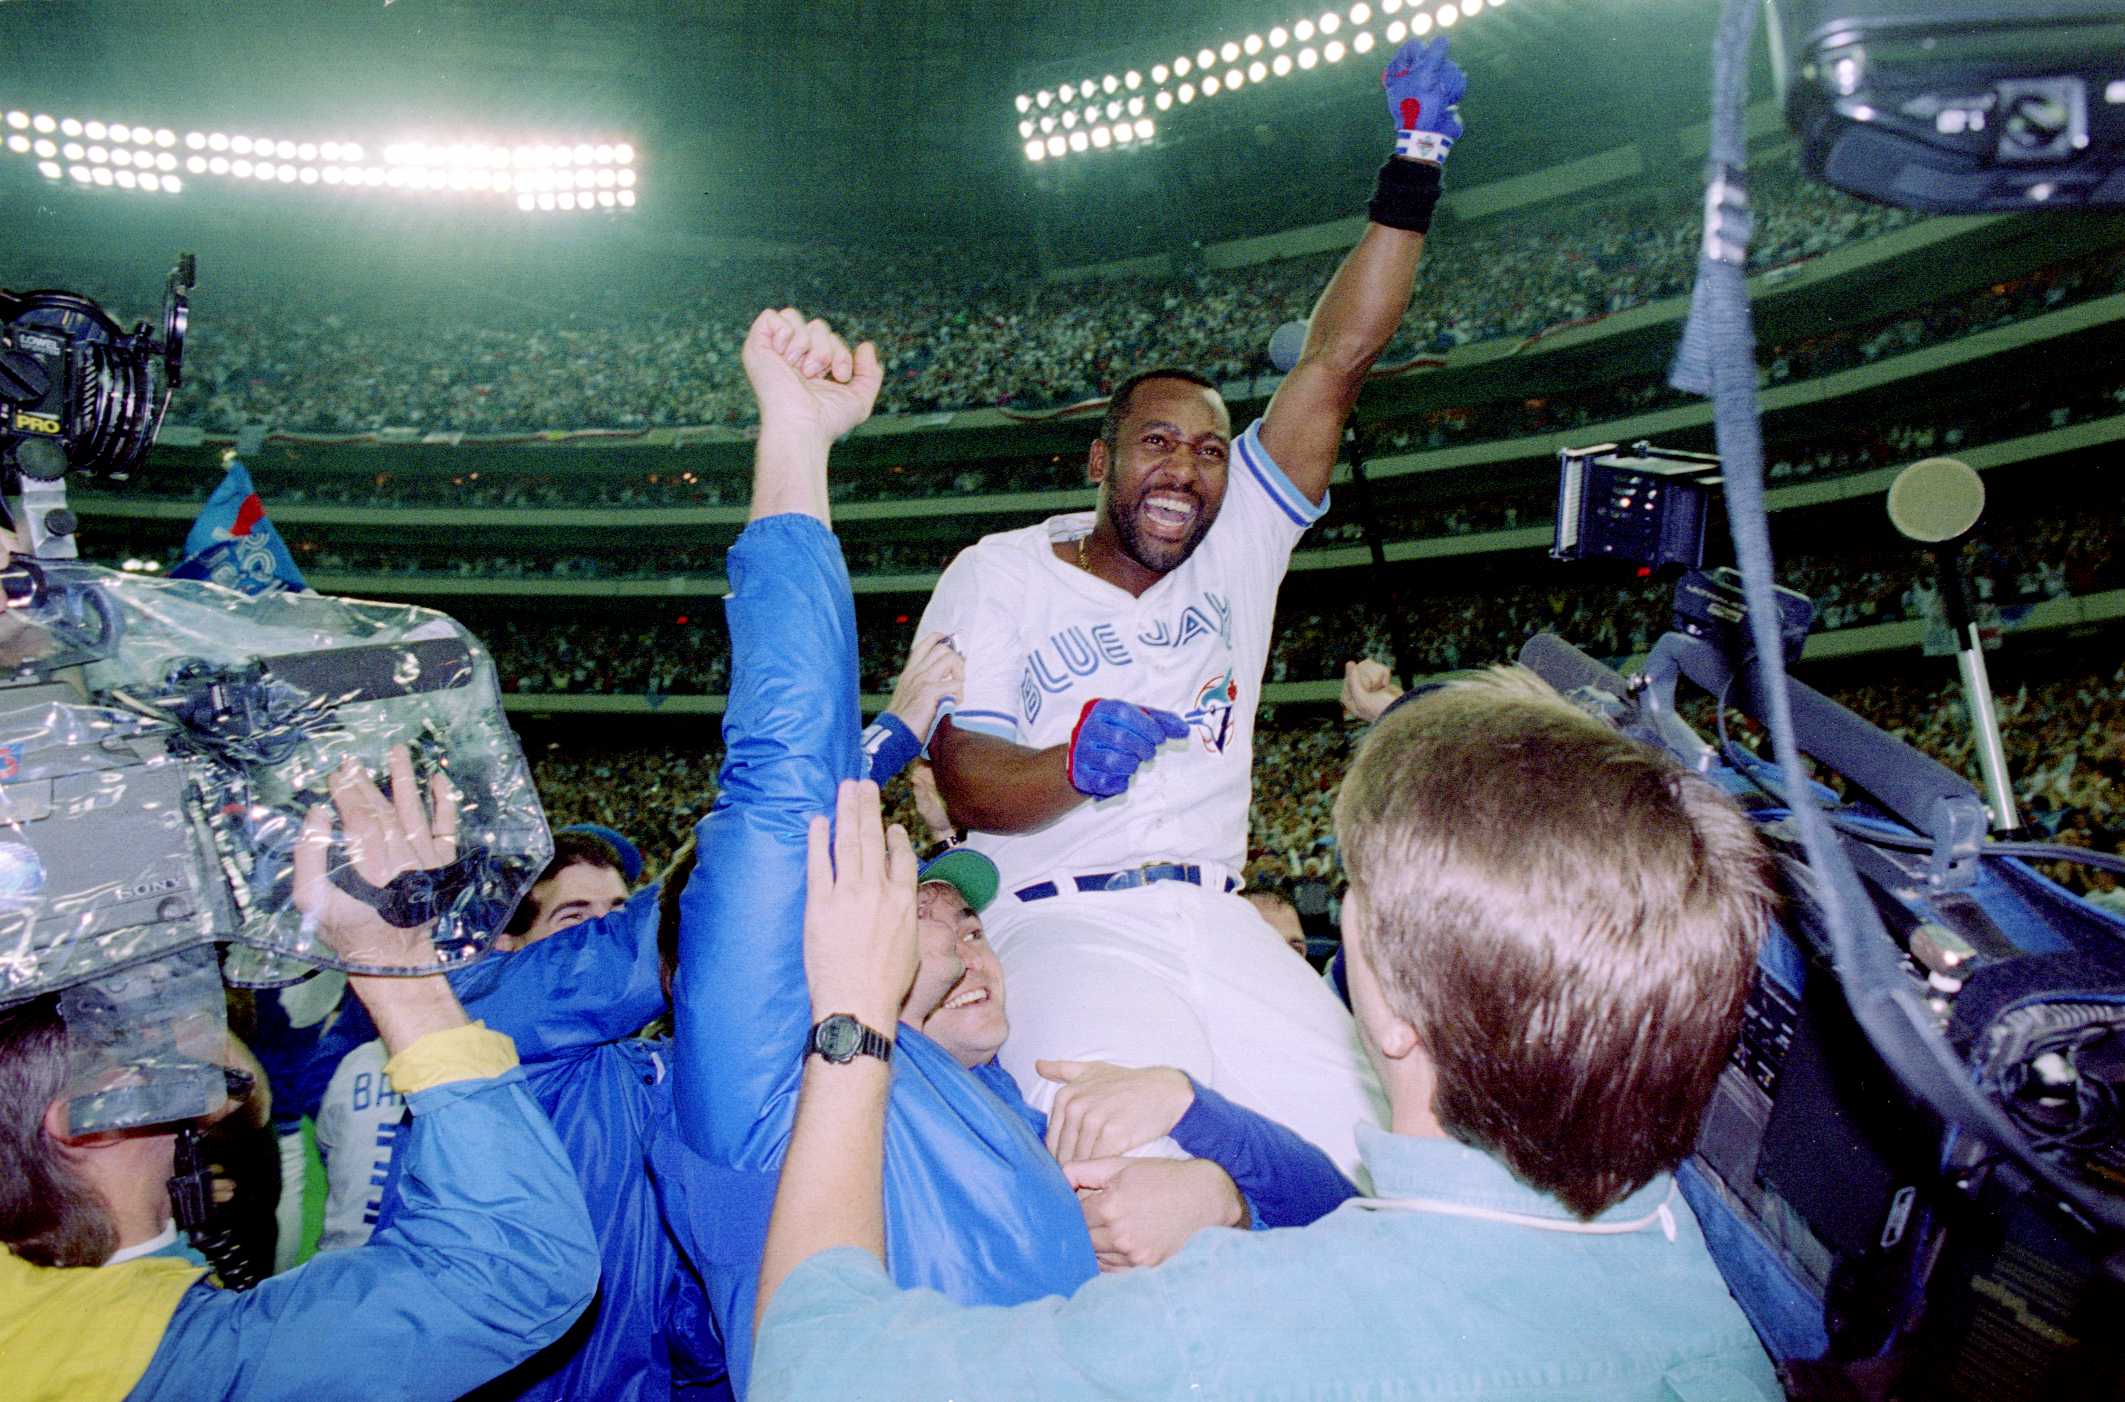 25 Oct 1993: Joe Carter is held aloft after hitting a three-run homer in the bottom of the ninth to win the World Series, four games to two, against the Philadelphia Phillies.